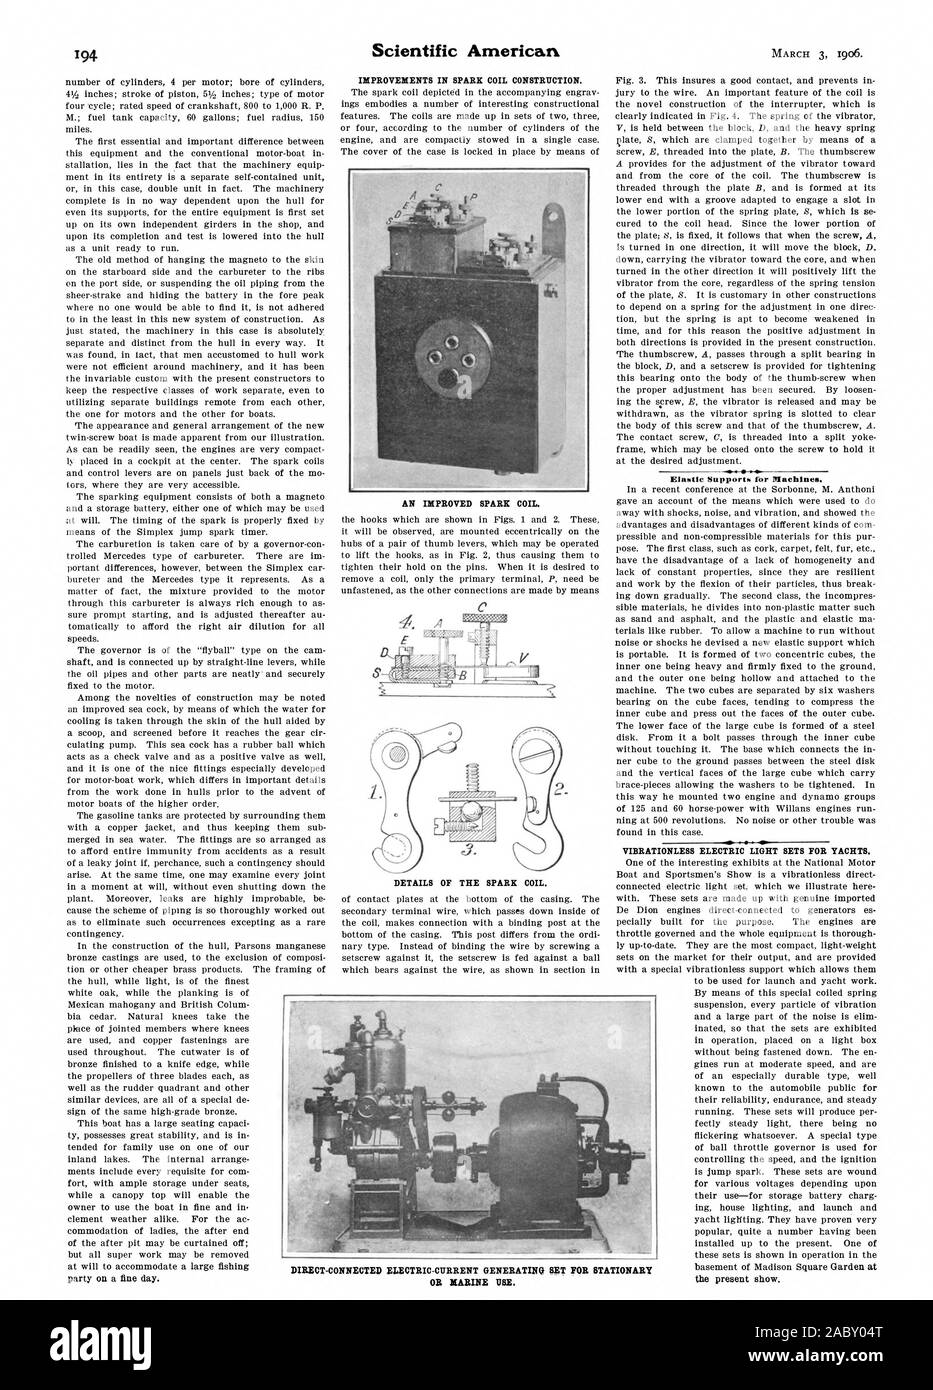 IMPROVEMENTS IN SPARK COIL CONSTRUCTION. AN IMPROVED SPARK COIL. DETAILS OF THE SPARK COIL. Elastic Supports for Machines. VIBRATIONLESS ELECTRIC LIGHT SETS FOR YACHTS. the present show. .4E1 0 WI DIRECT-CONNECTED ELECTRIC-CURRENT GENERATING SET FOR STATIONARY OR MARINE USE., scientific american, 1906-03-11 Stock Photo